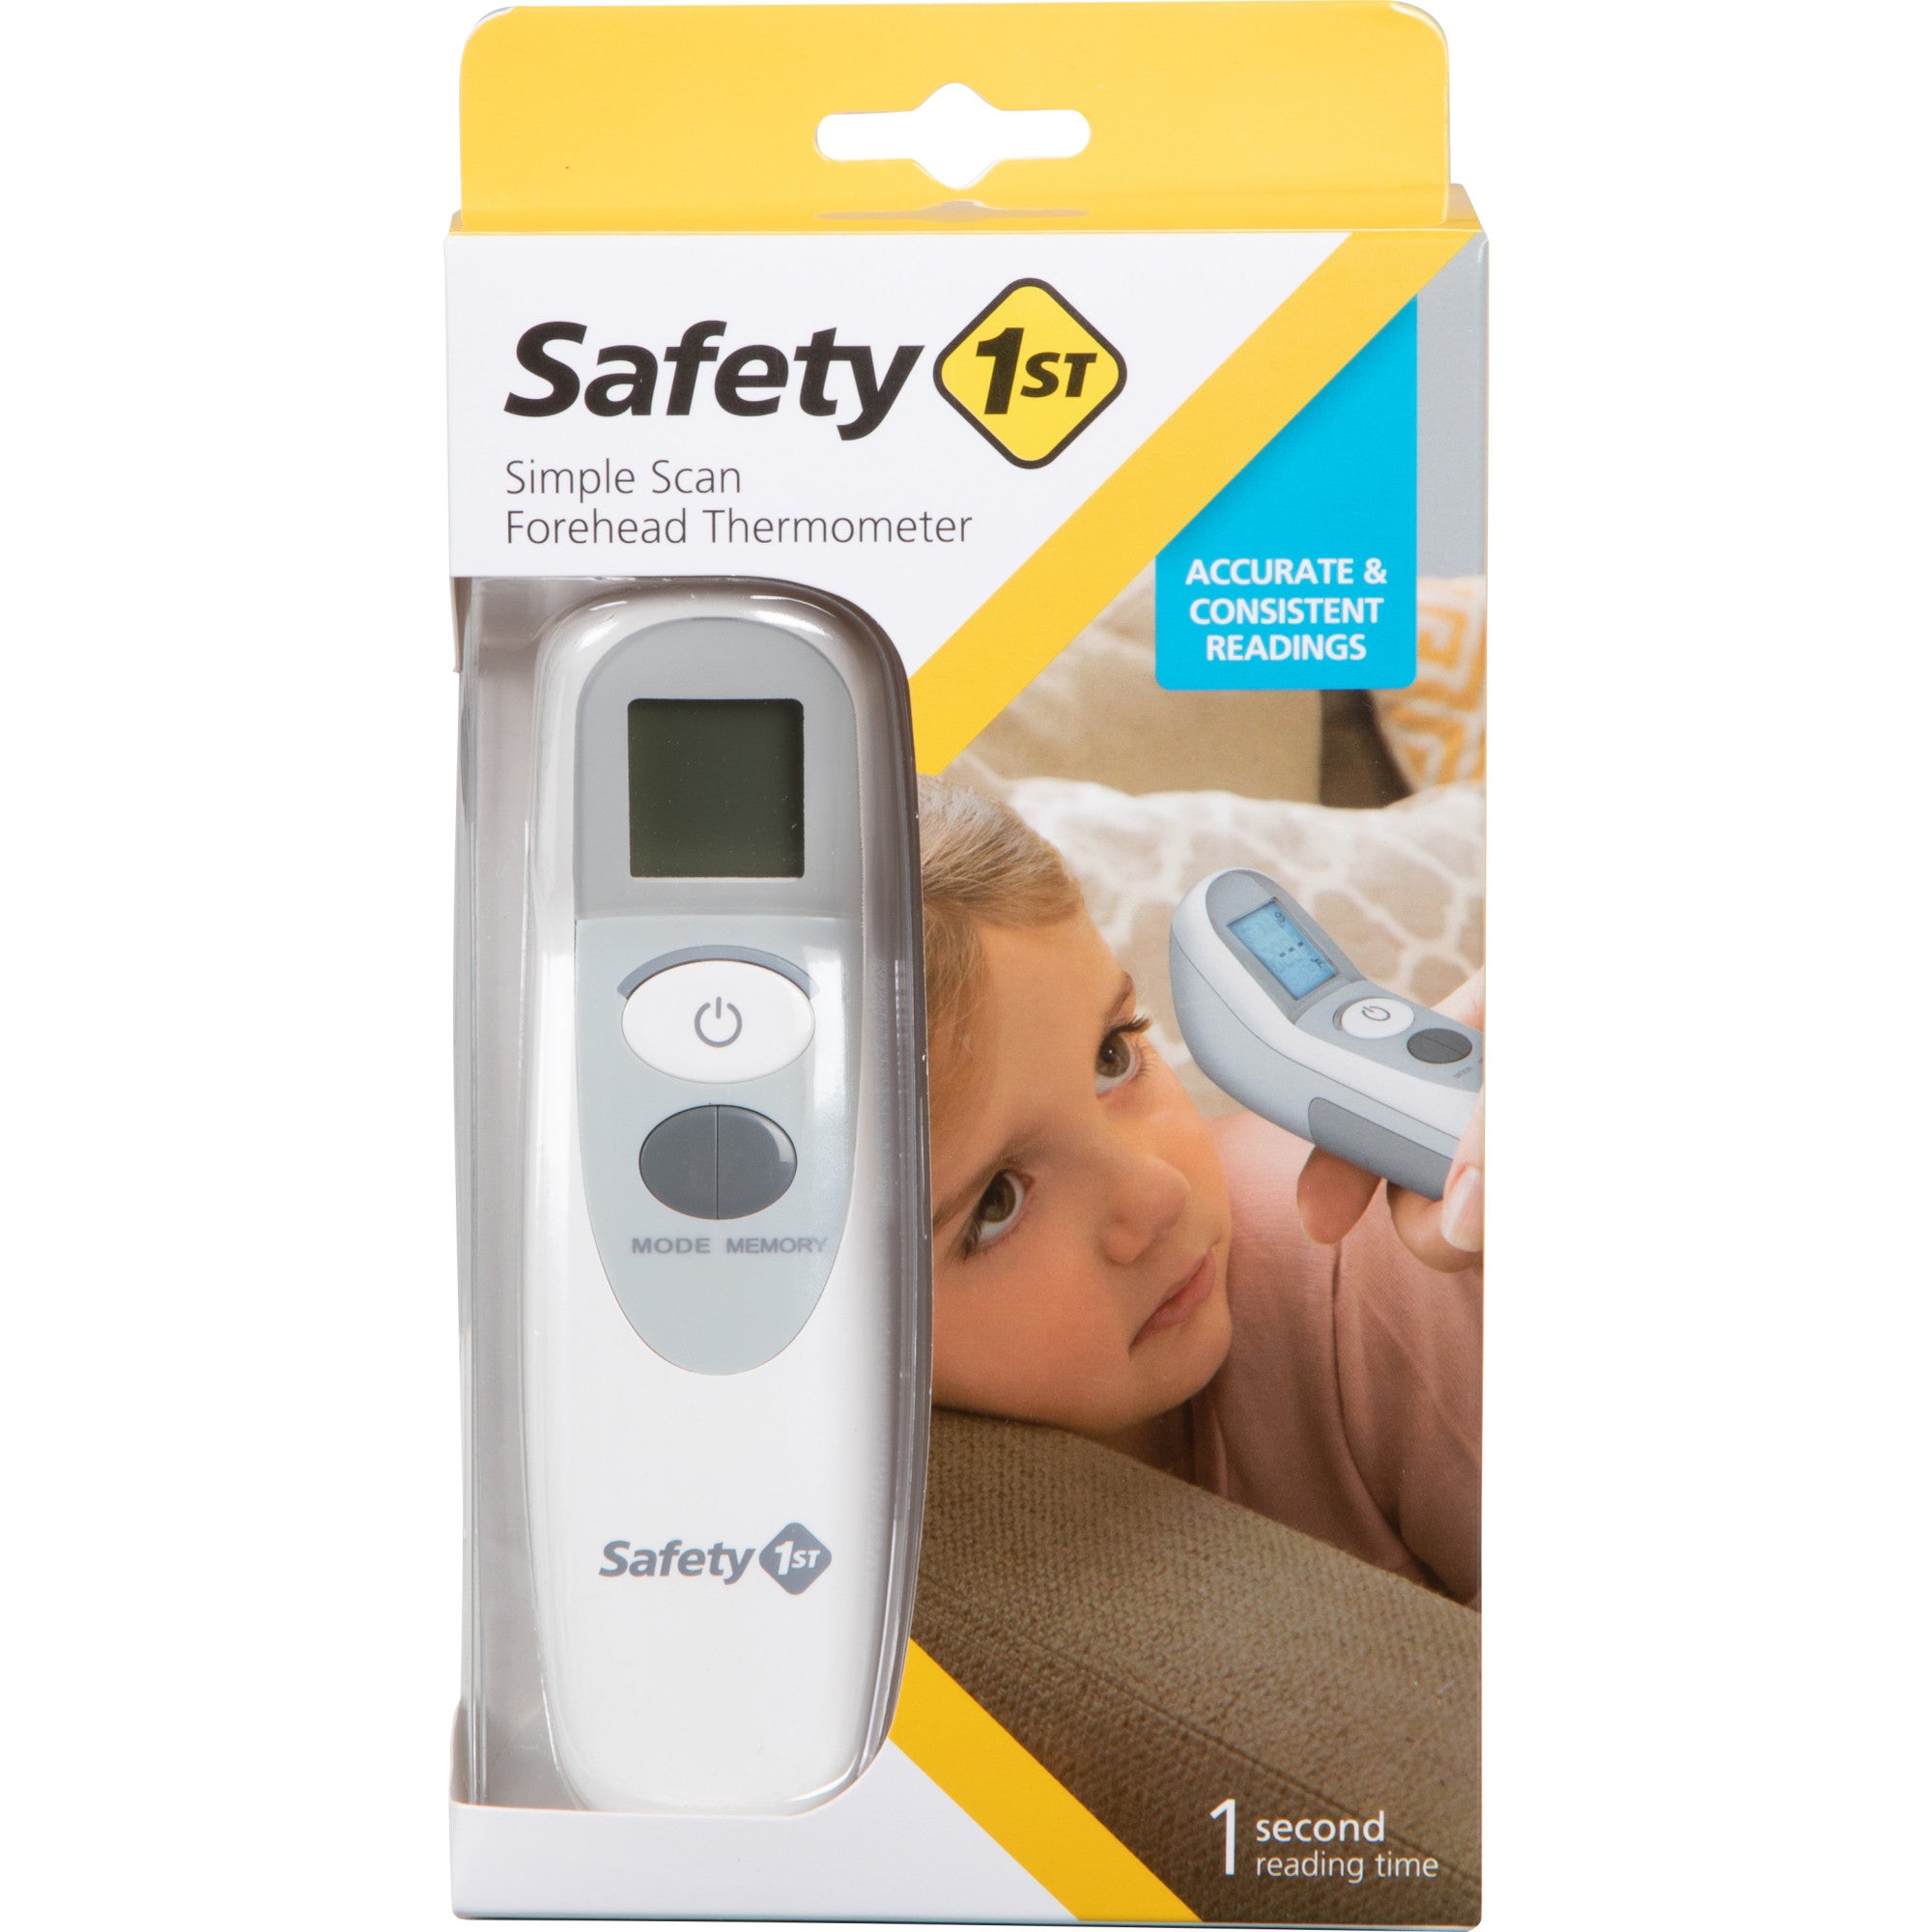 Simple Scan Forehead Thermometer - Grey